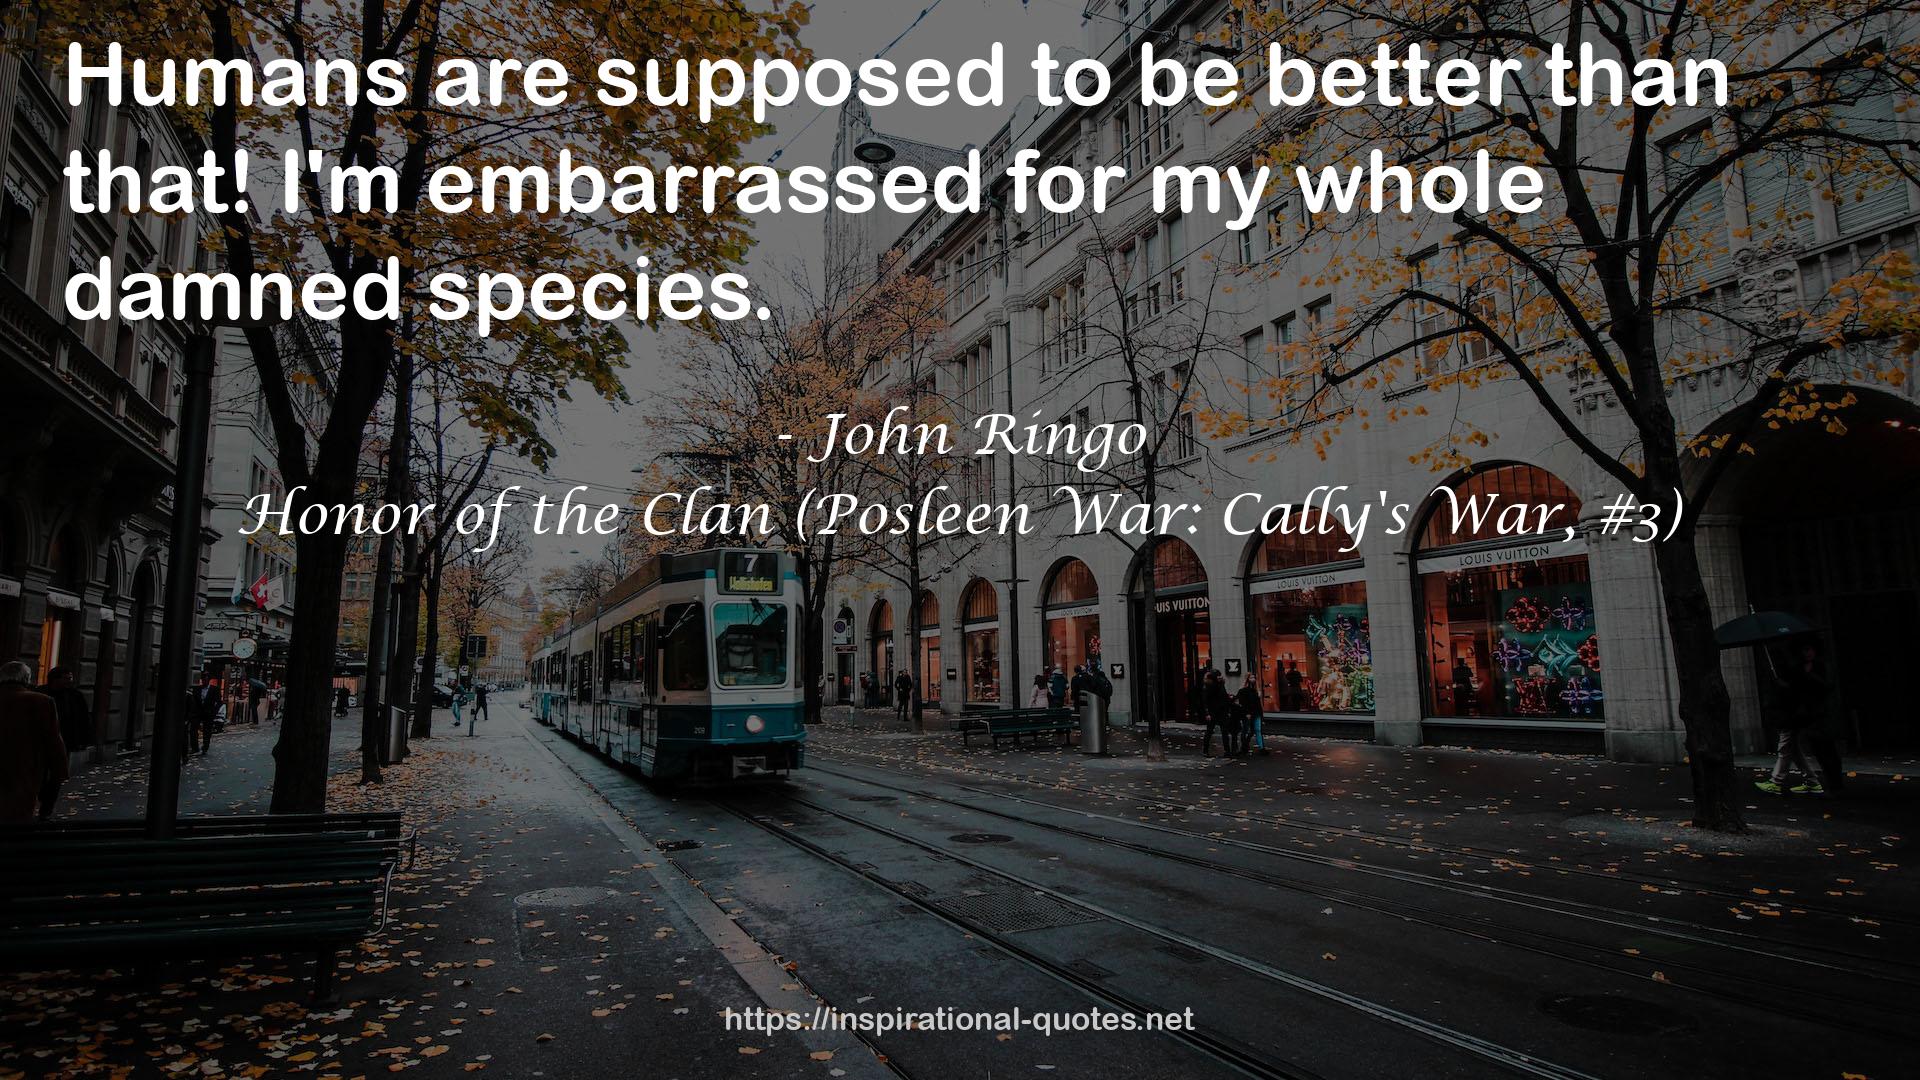 Honor of the Clan (Posleen War: Cally's War, #3) QUOTES